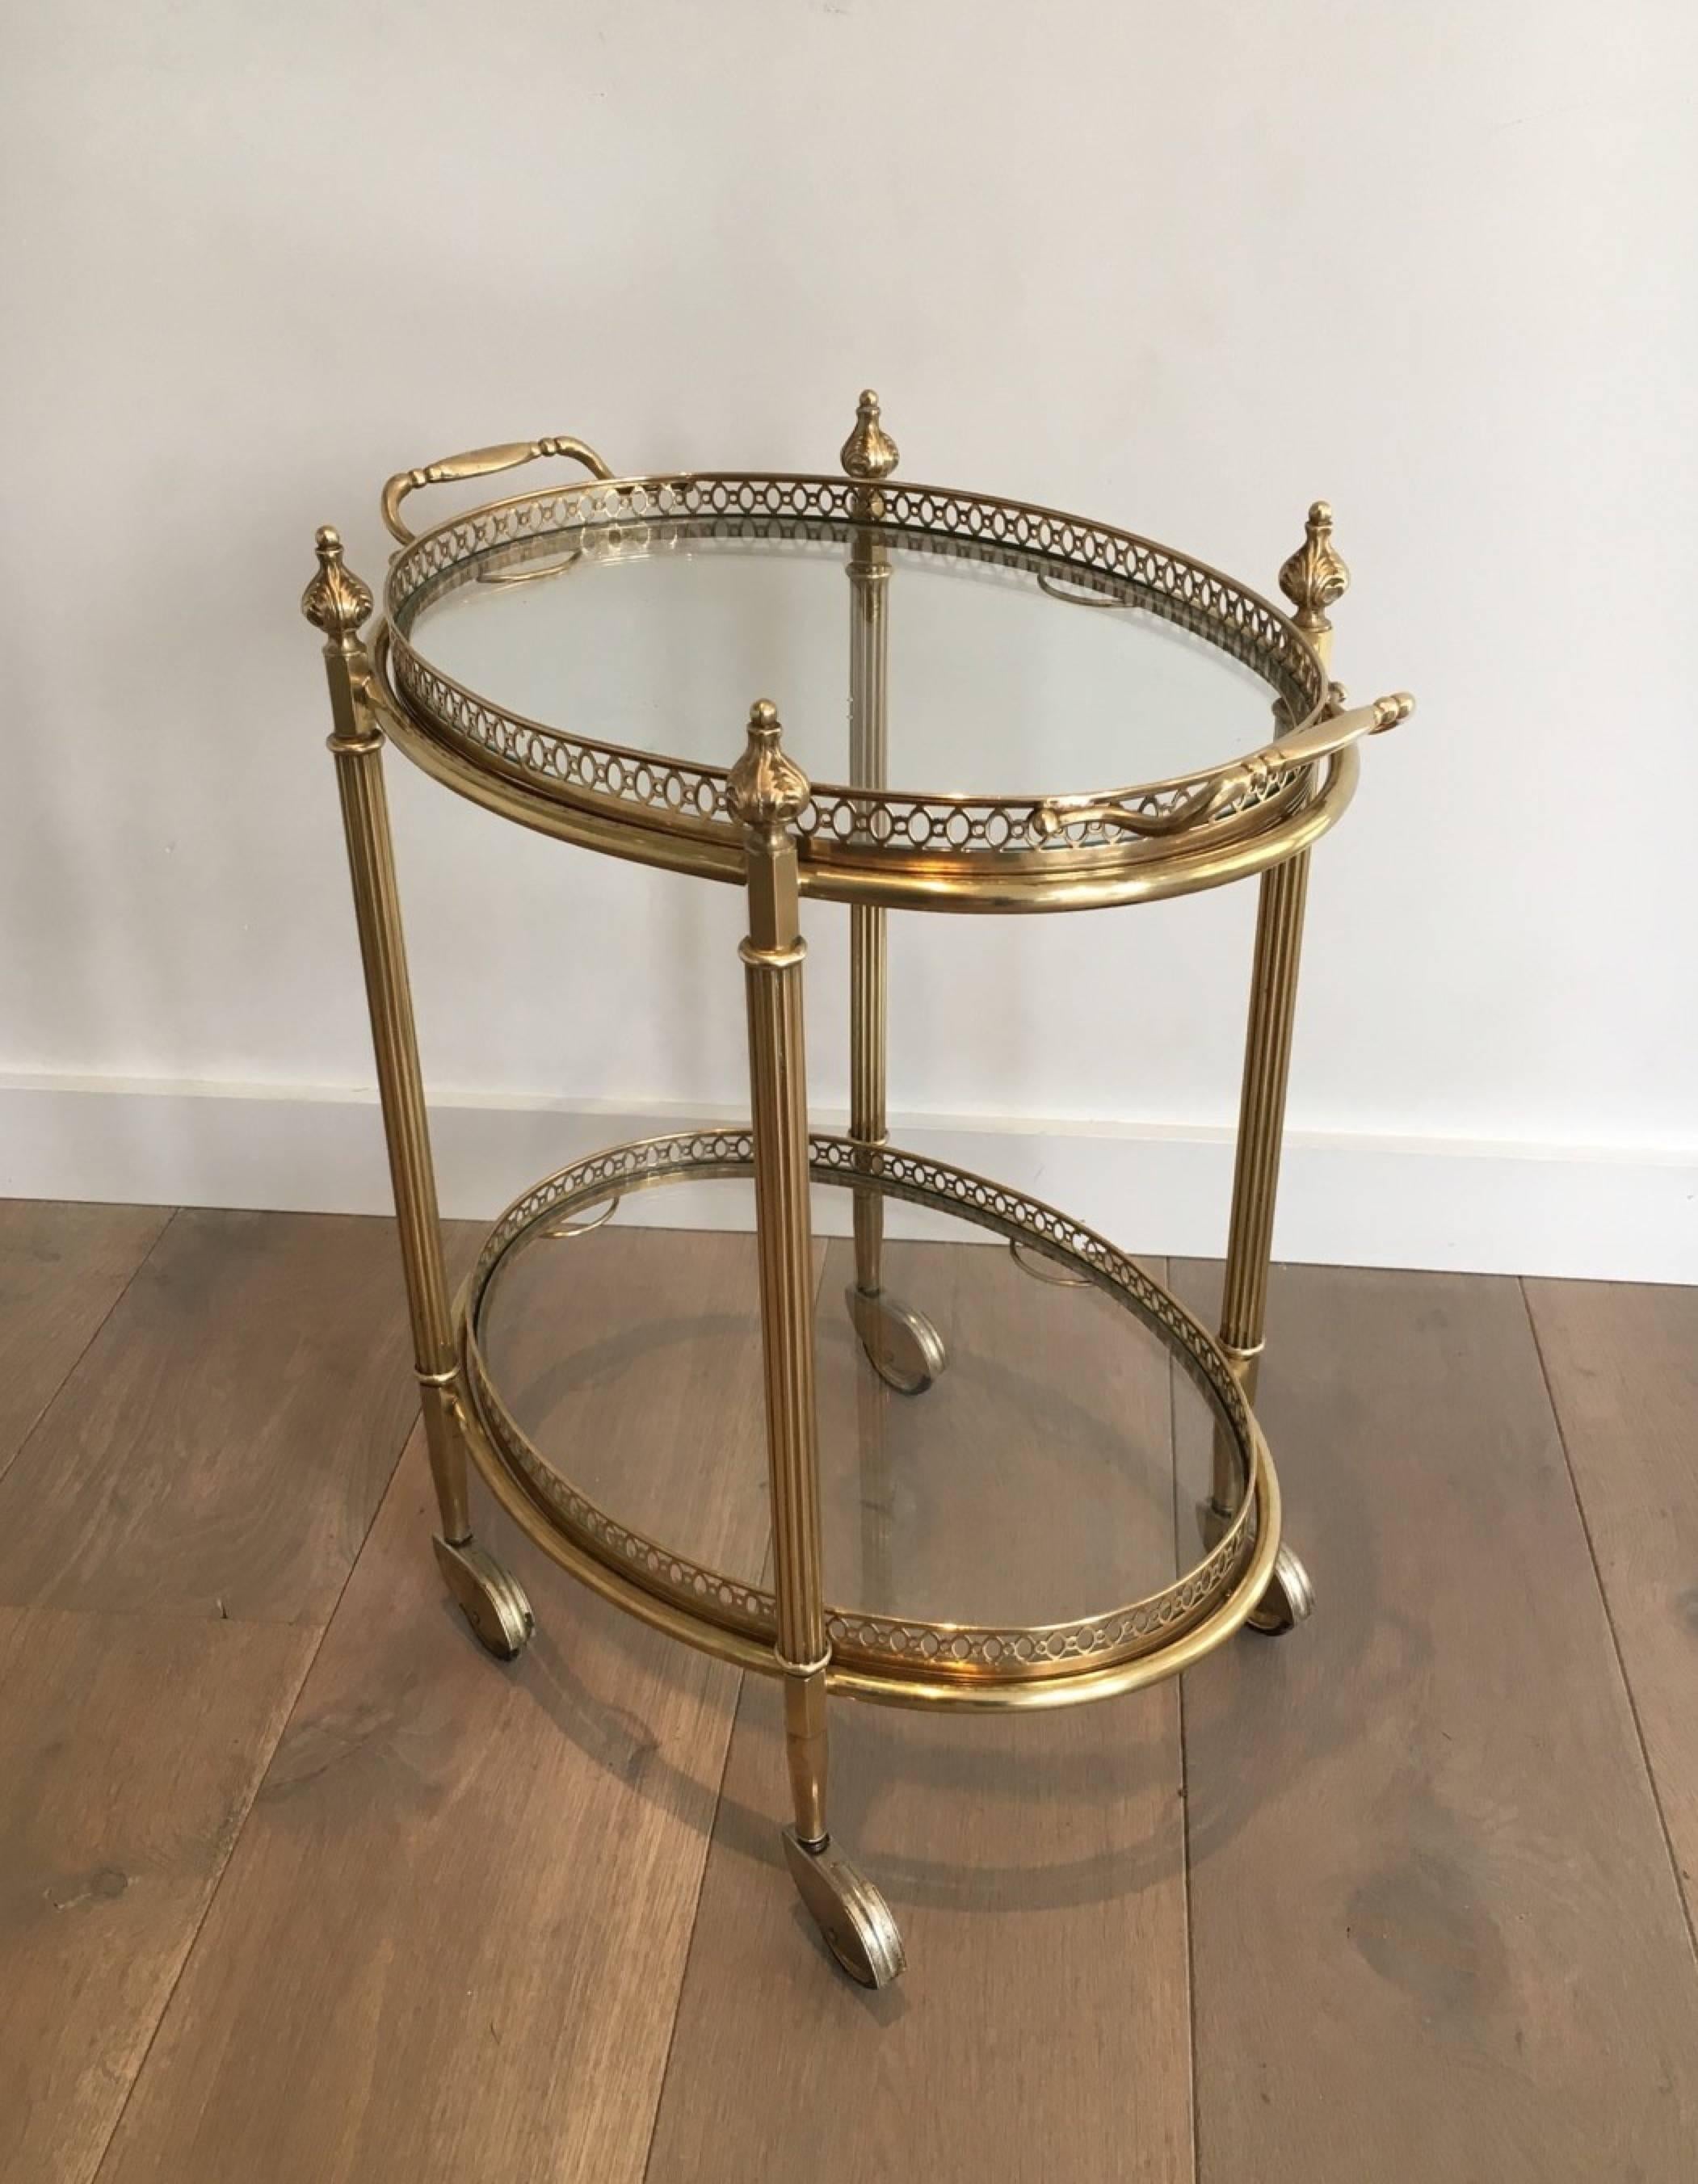 Neoclassical oval brass bar cart with removable trays. Attributed to Maison Baguès, French, circa 1940

This piece is currently in France, please allow 4 to 6 weeks for delivery. Shipping to our warehouse in Long Island City is included in the